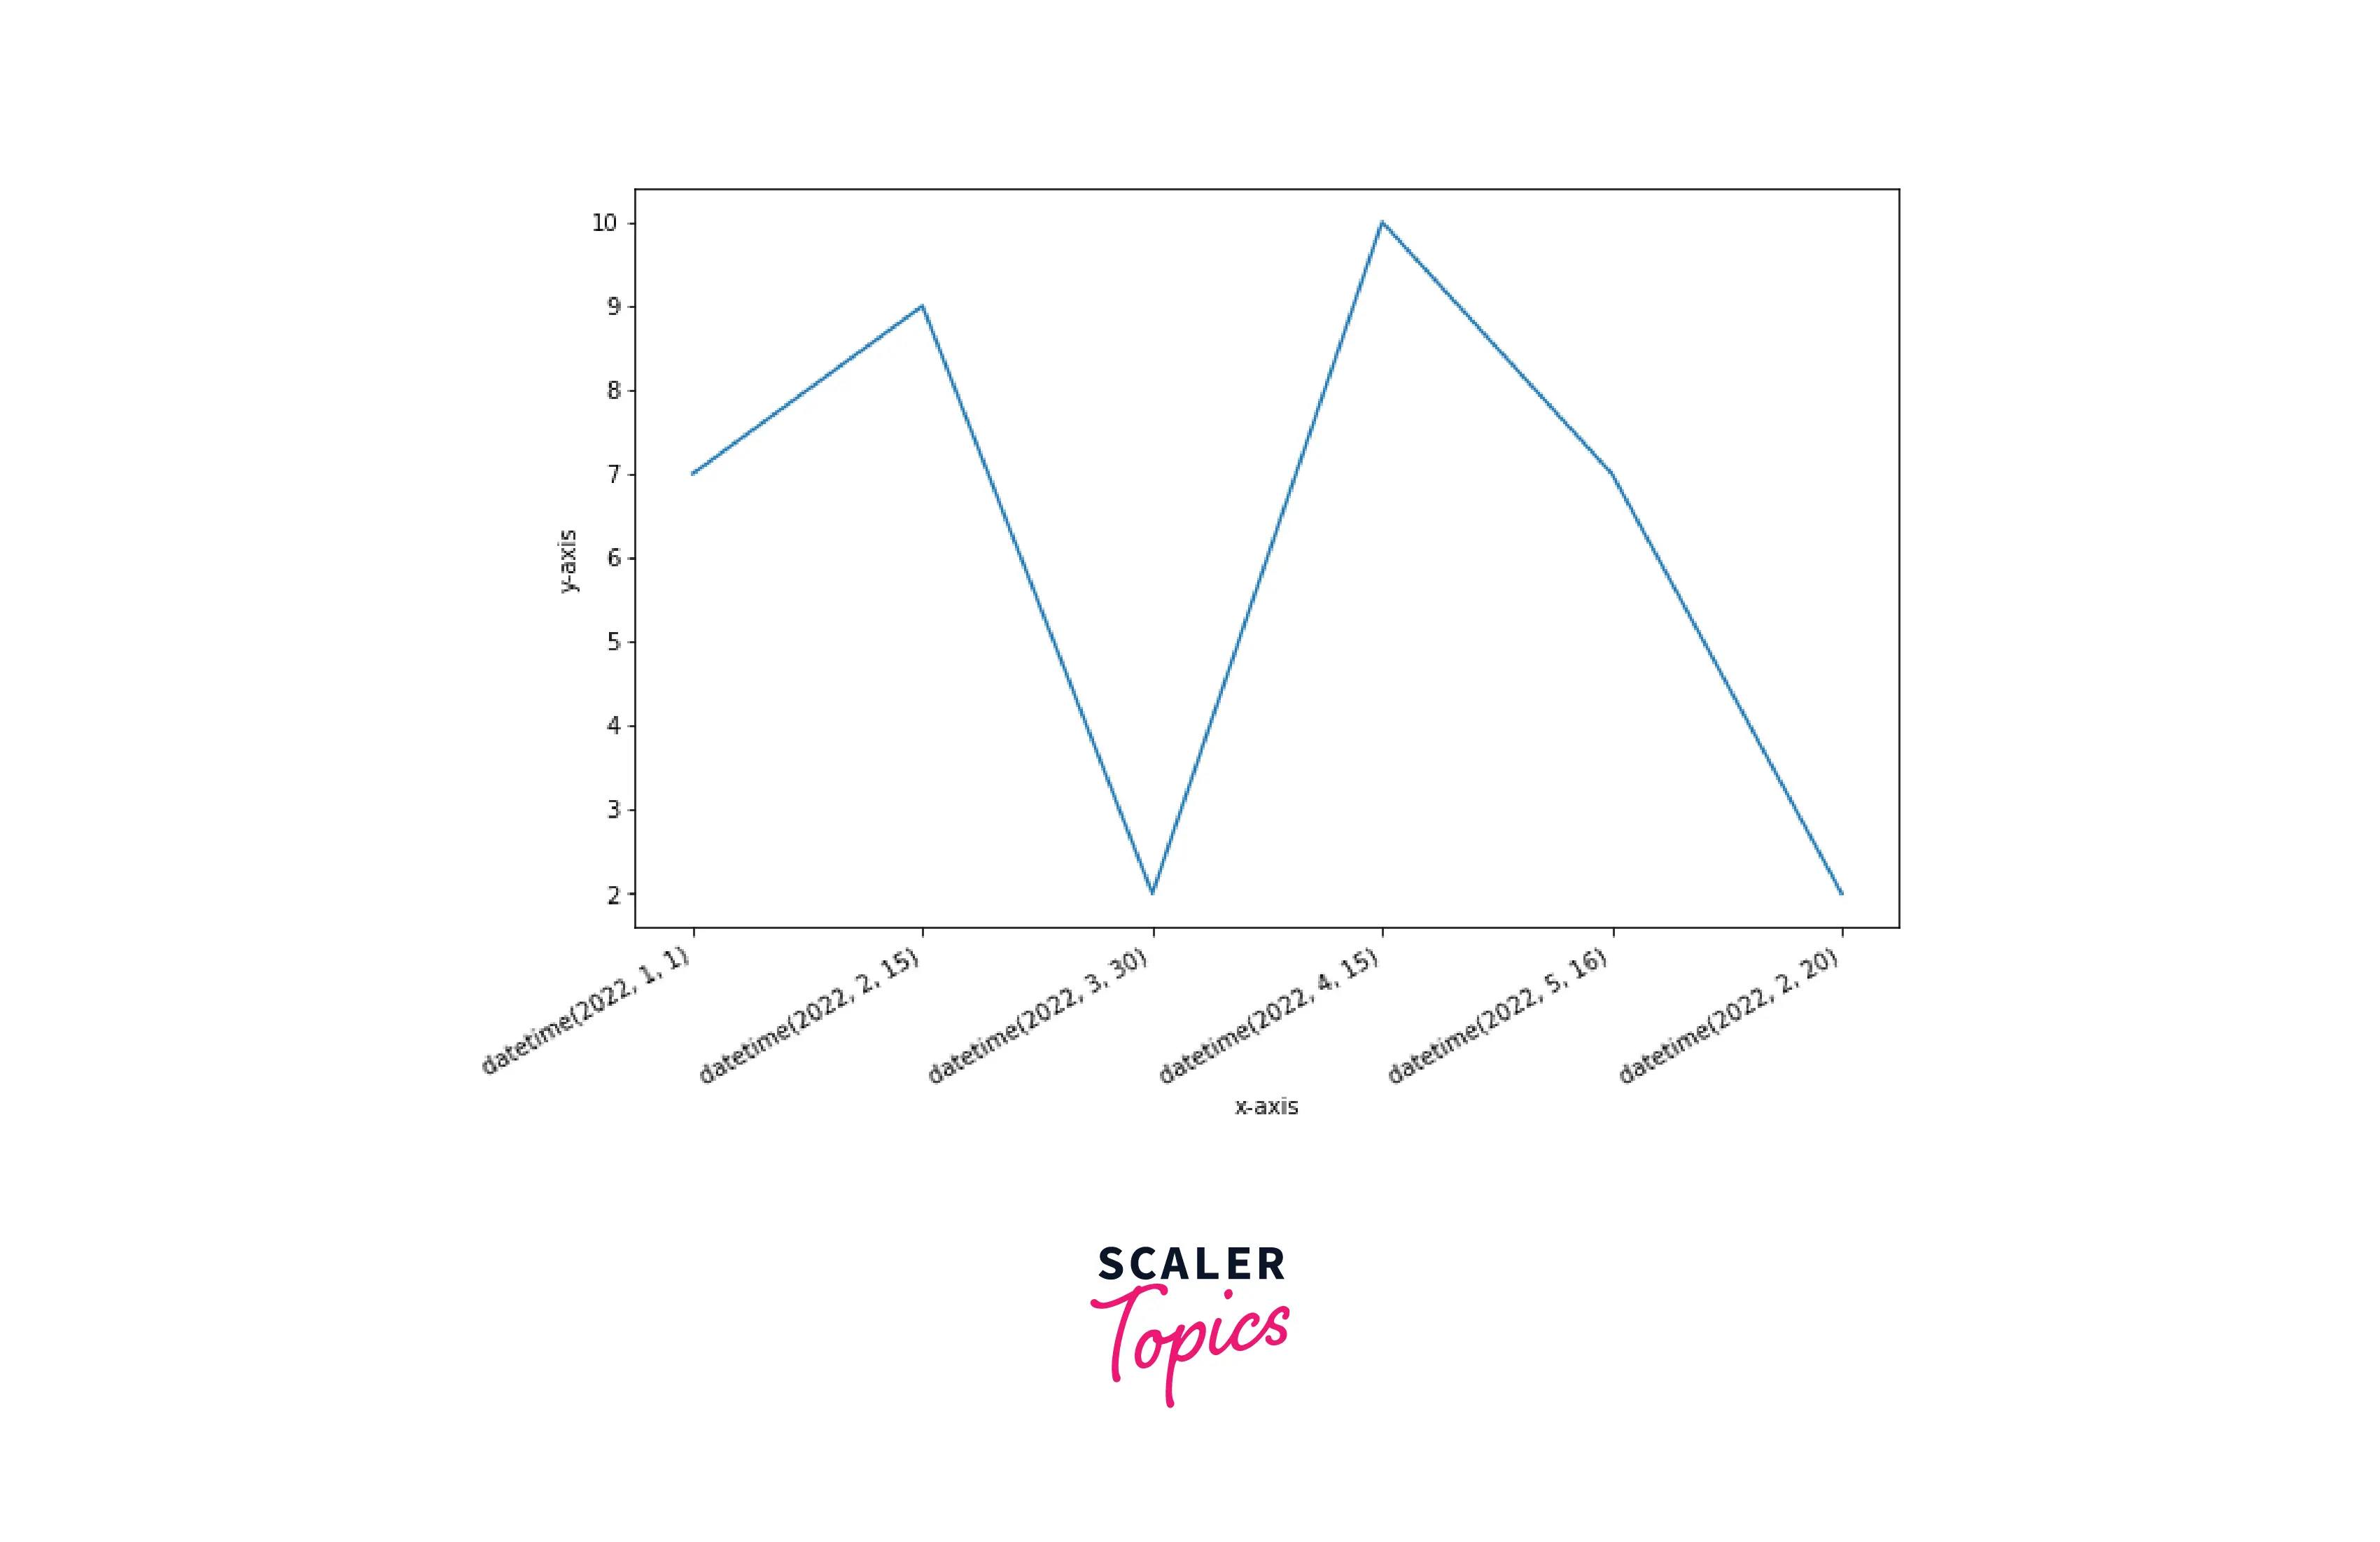 Using the function setp to adjust the x-axis labels